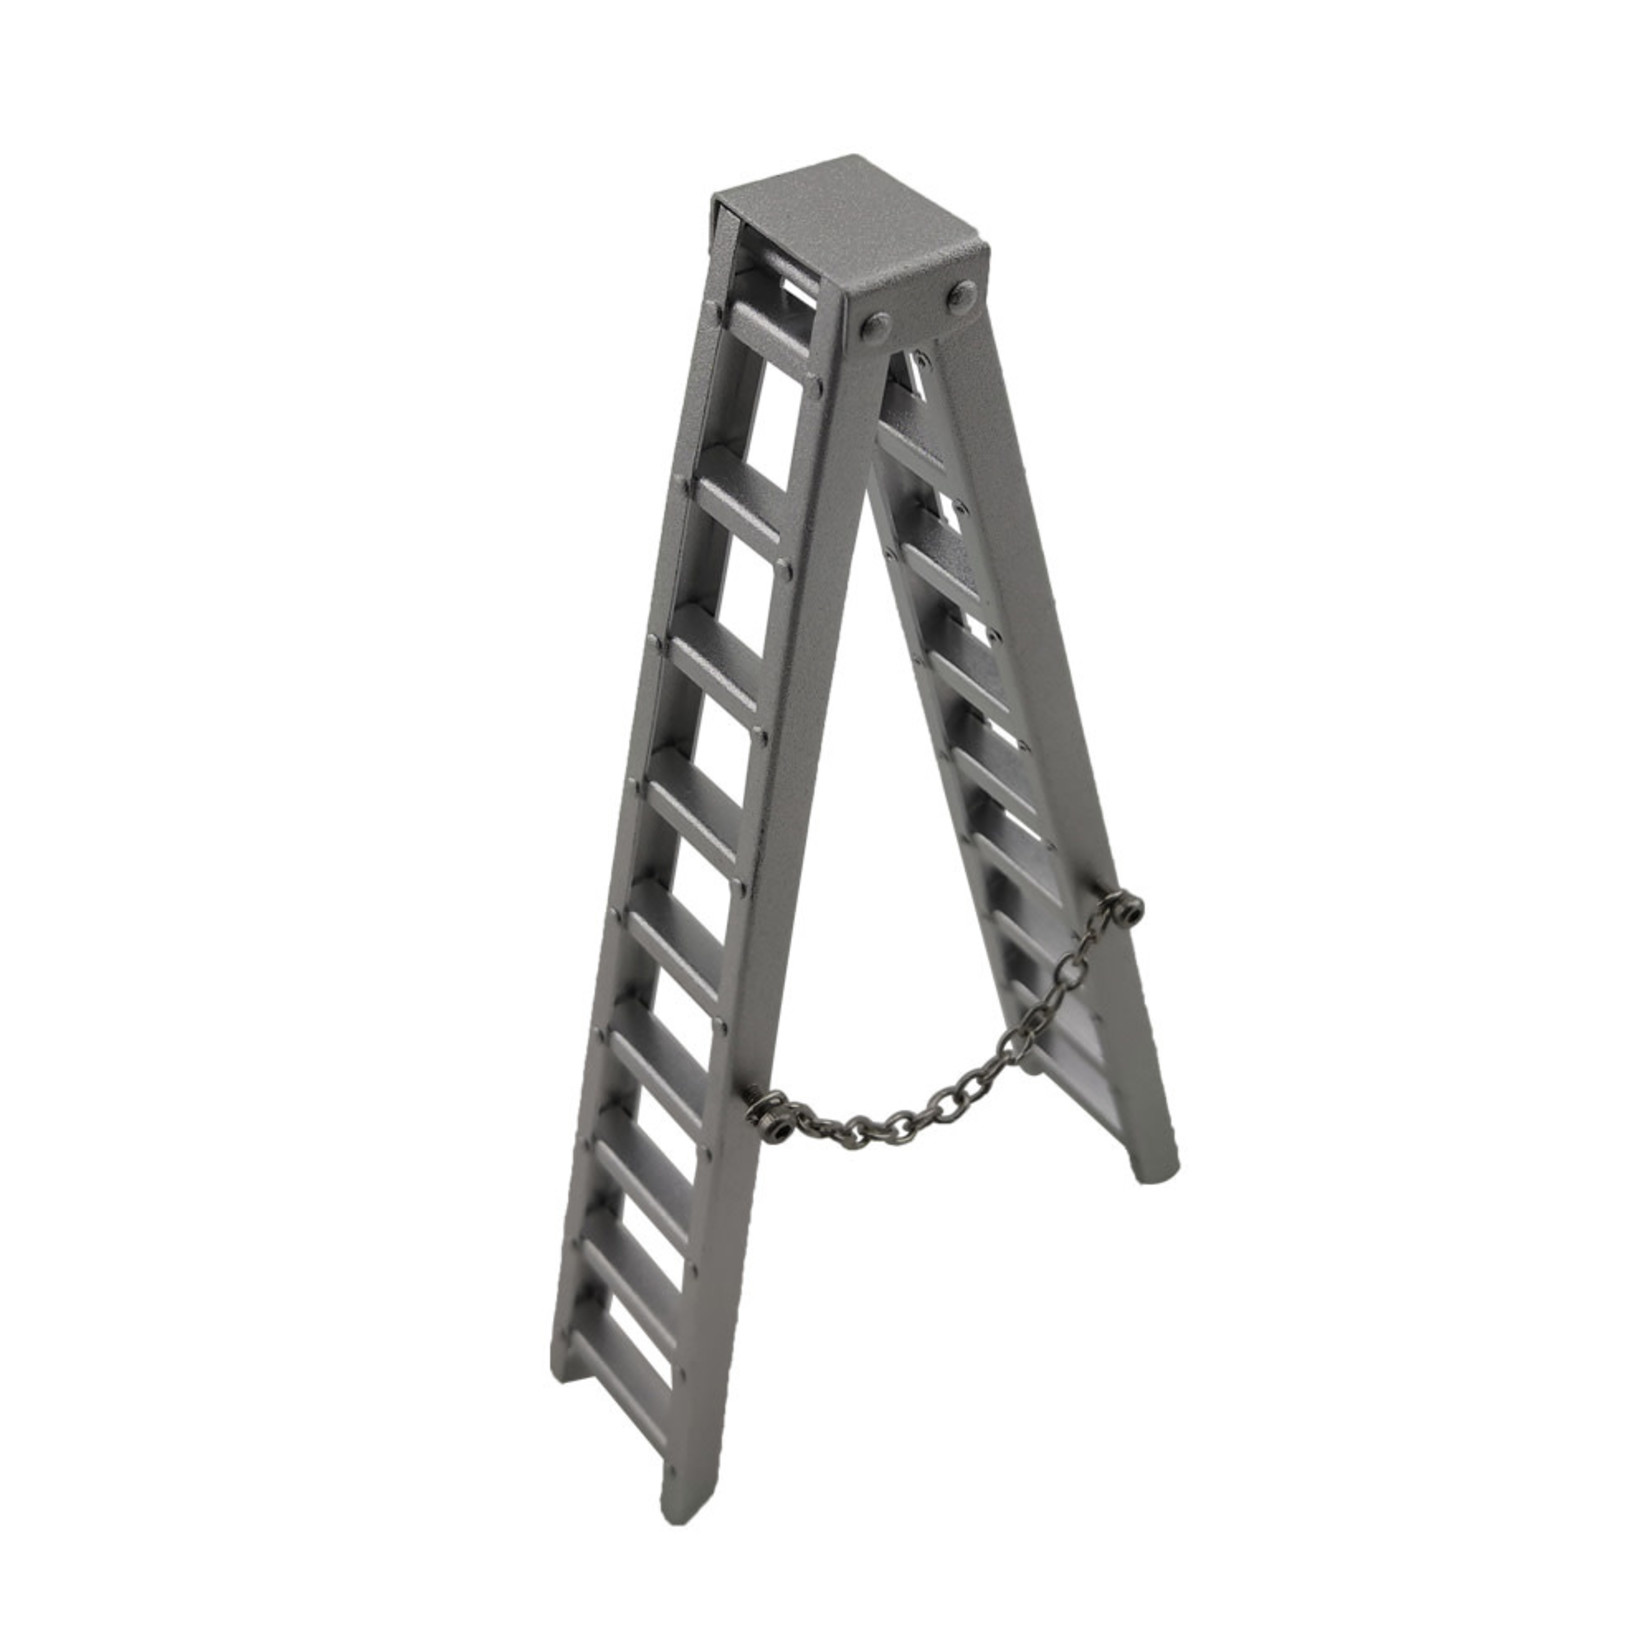 Hobby Details 1/10 Aluminum Ladder - Silver - Clearance